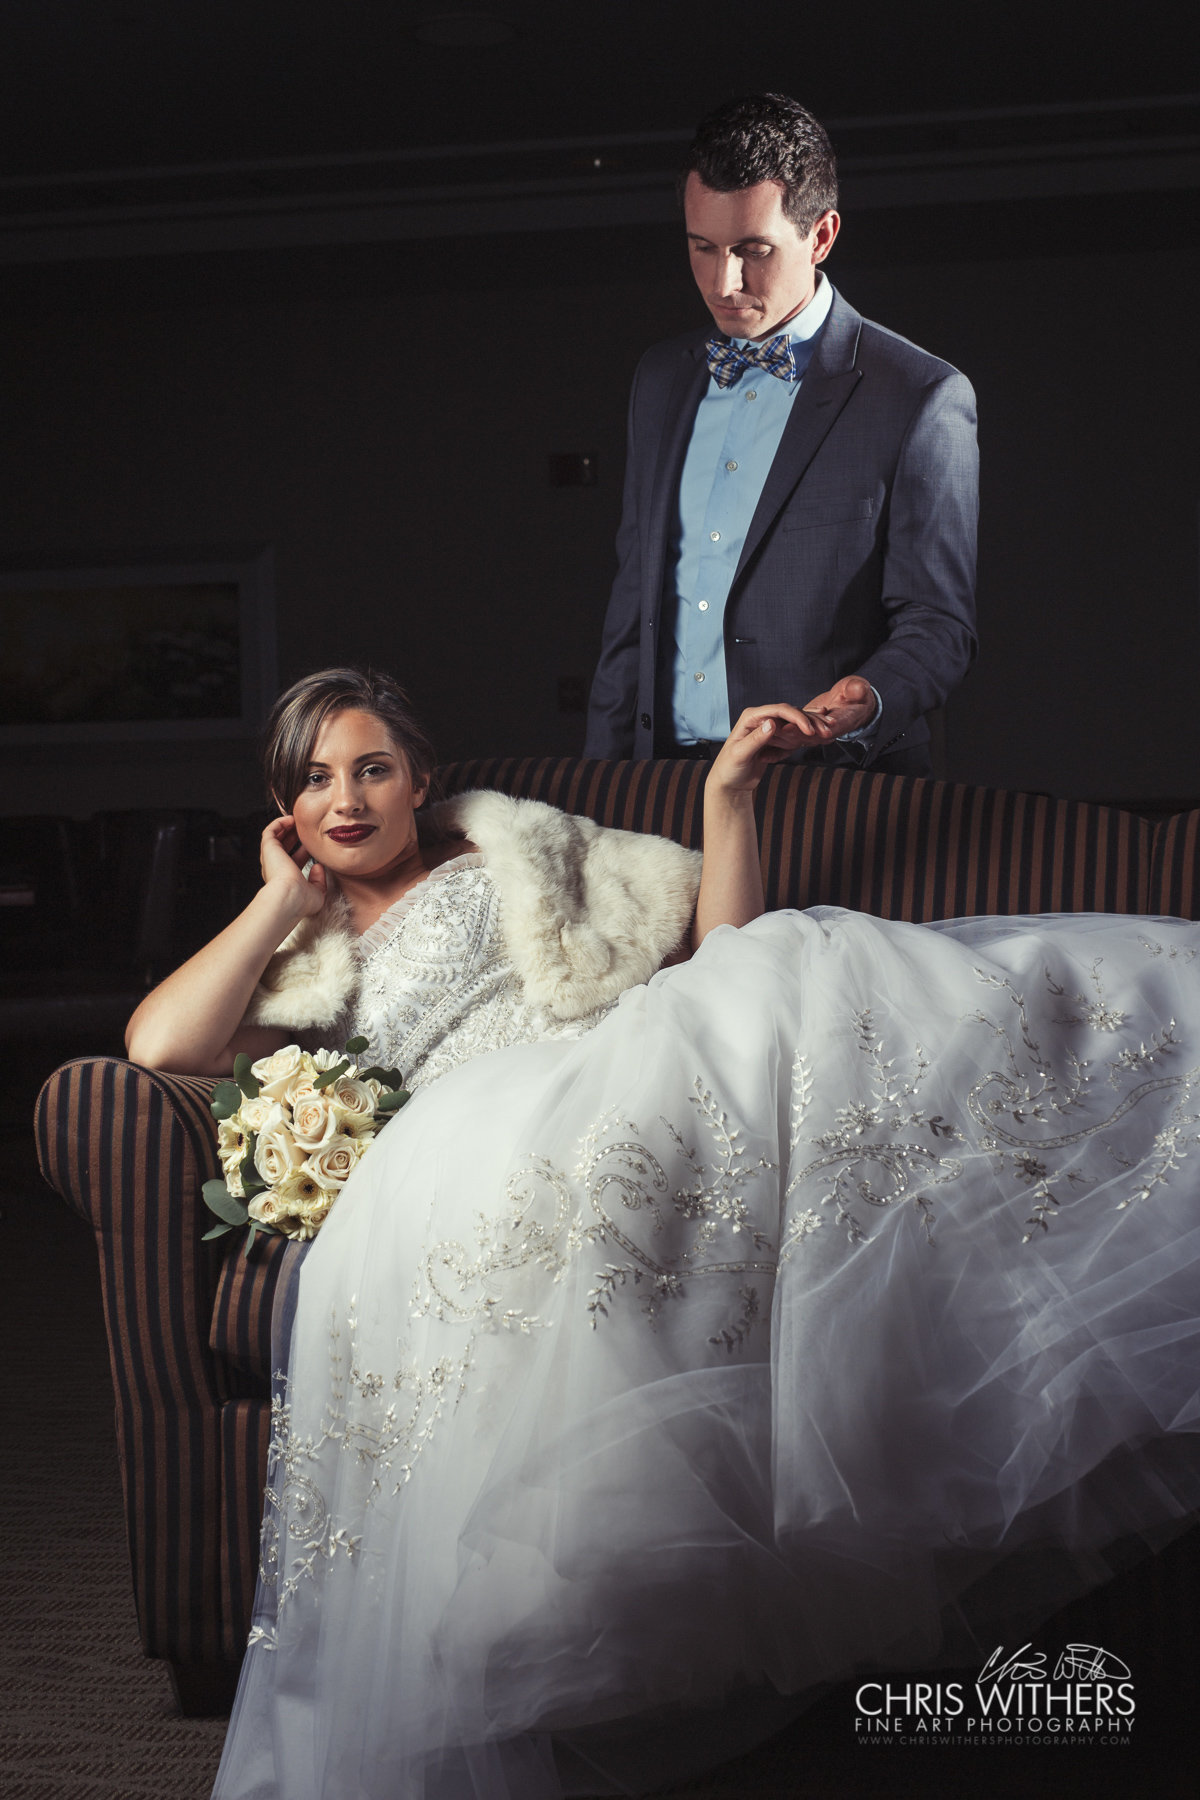 Springfield Illinois Wedding Photographer - Chris Withers Photography (67 of 159)